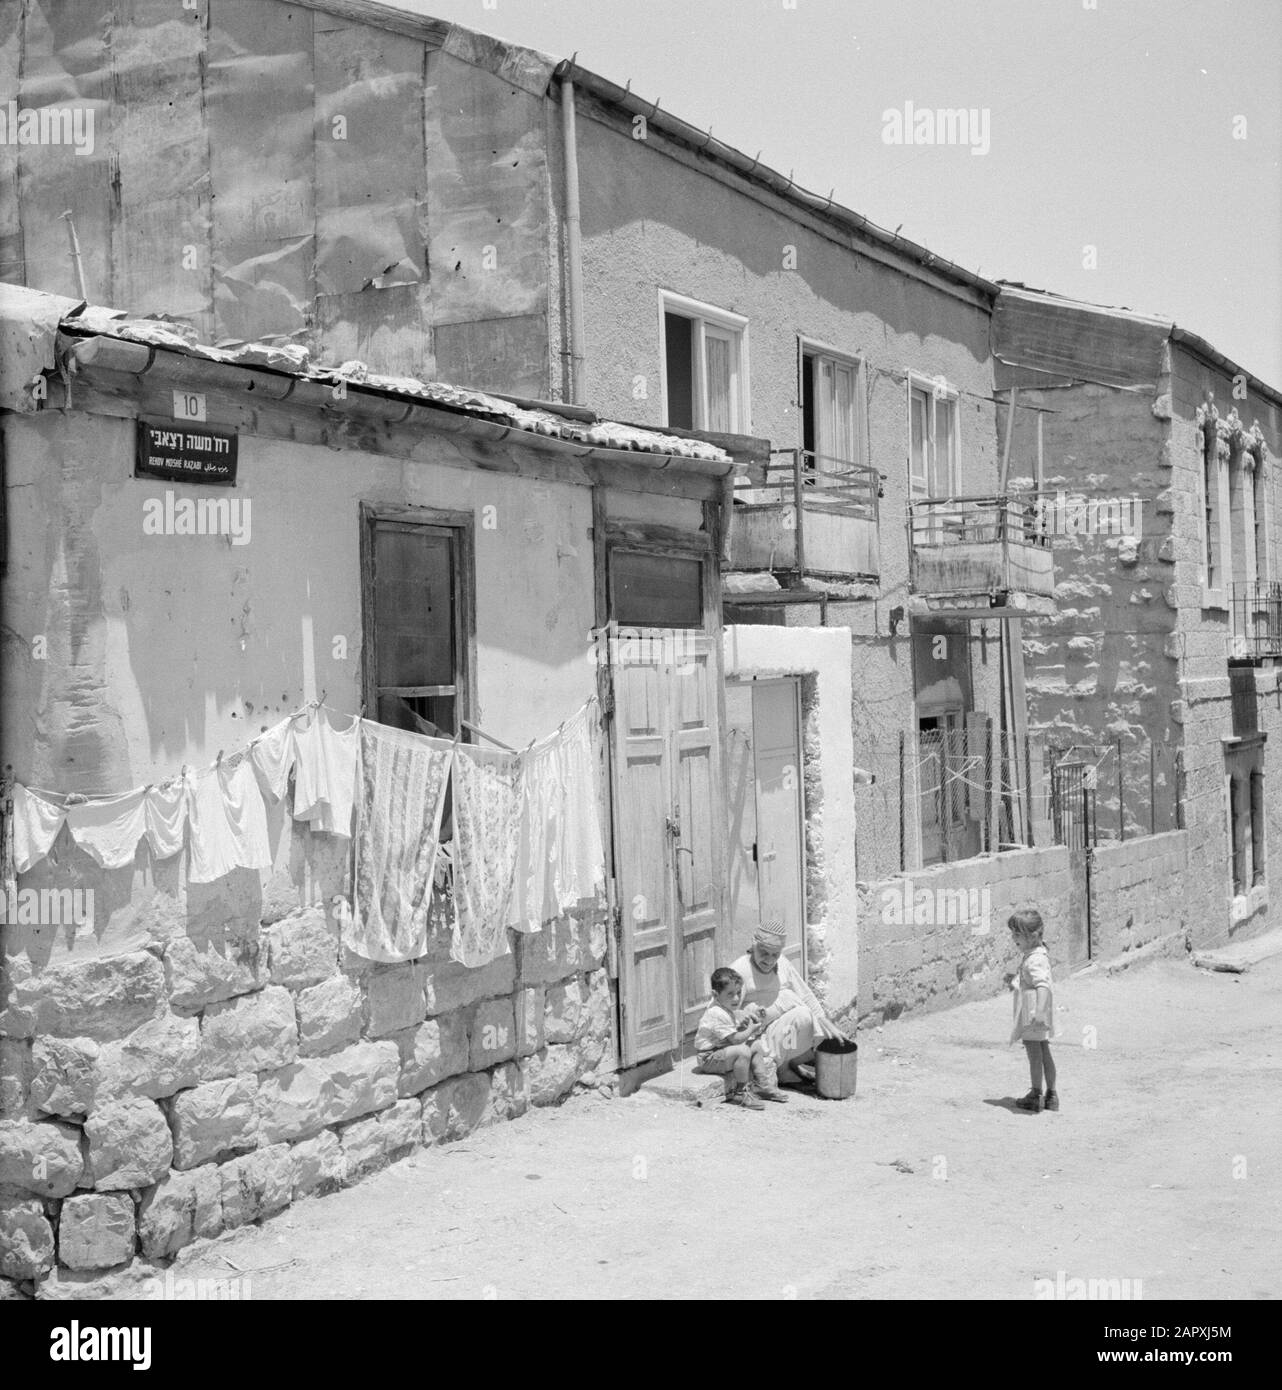 Israel 1964-1965: Jerusalem (Jerusalem), Mea Shearim  Street in the district of Mea Shearim with household activity Annotation: Mea Shearim, also called Meah Shearim or a hundred gates, is one of the oldest neighborhoods of Jerusalem. It was built from about 1870 by Hasidic Jews who lived in the Old Town until then. However, there was too little space and so they bought a piece of land northwest of the city. This land, a swamp area, was cultivated into land to build a new neighborhood: Meah Shearim. The district is known anno 2012 as the most extreme orthodox Jewish quarter in the world and is Stock Photo